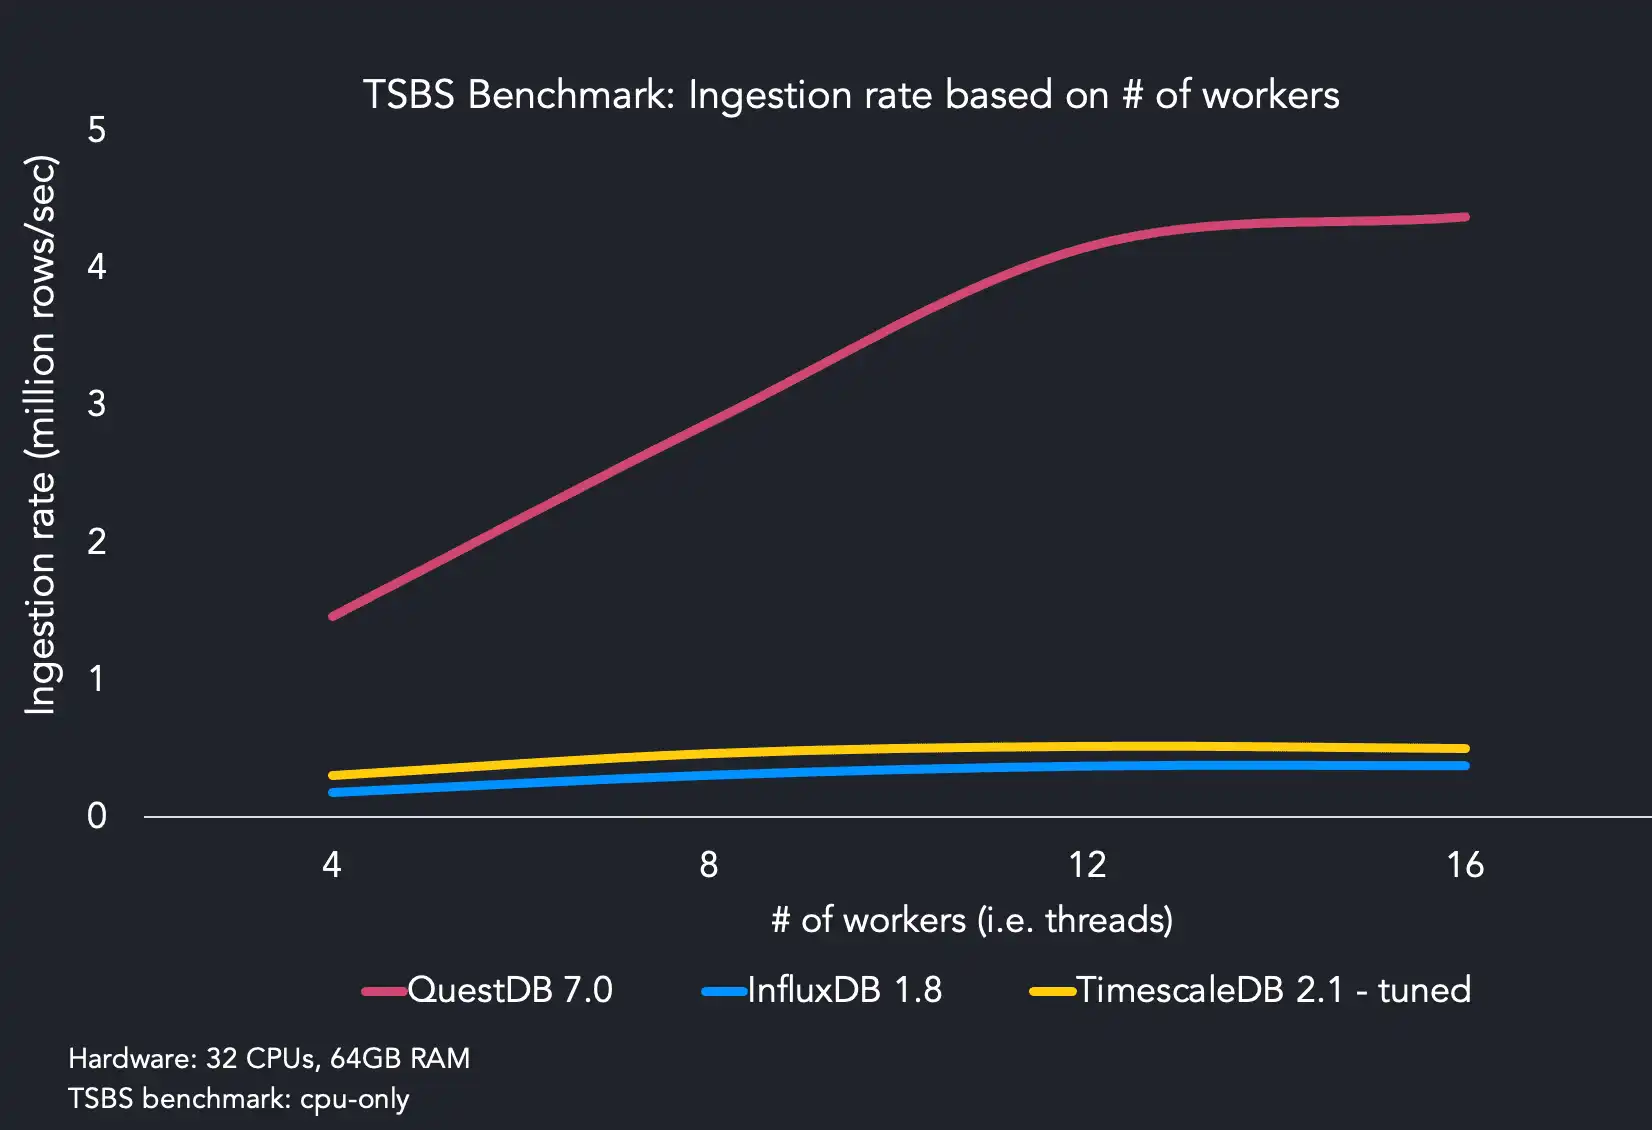 A chart showing high-cardinality ingestion performance of InfluxDB, TimescaleDB, and QuestDB